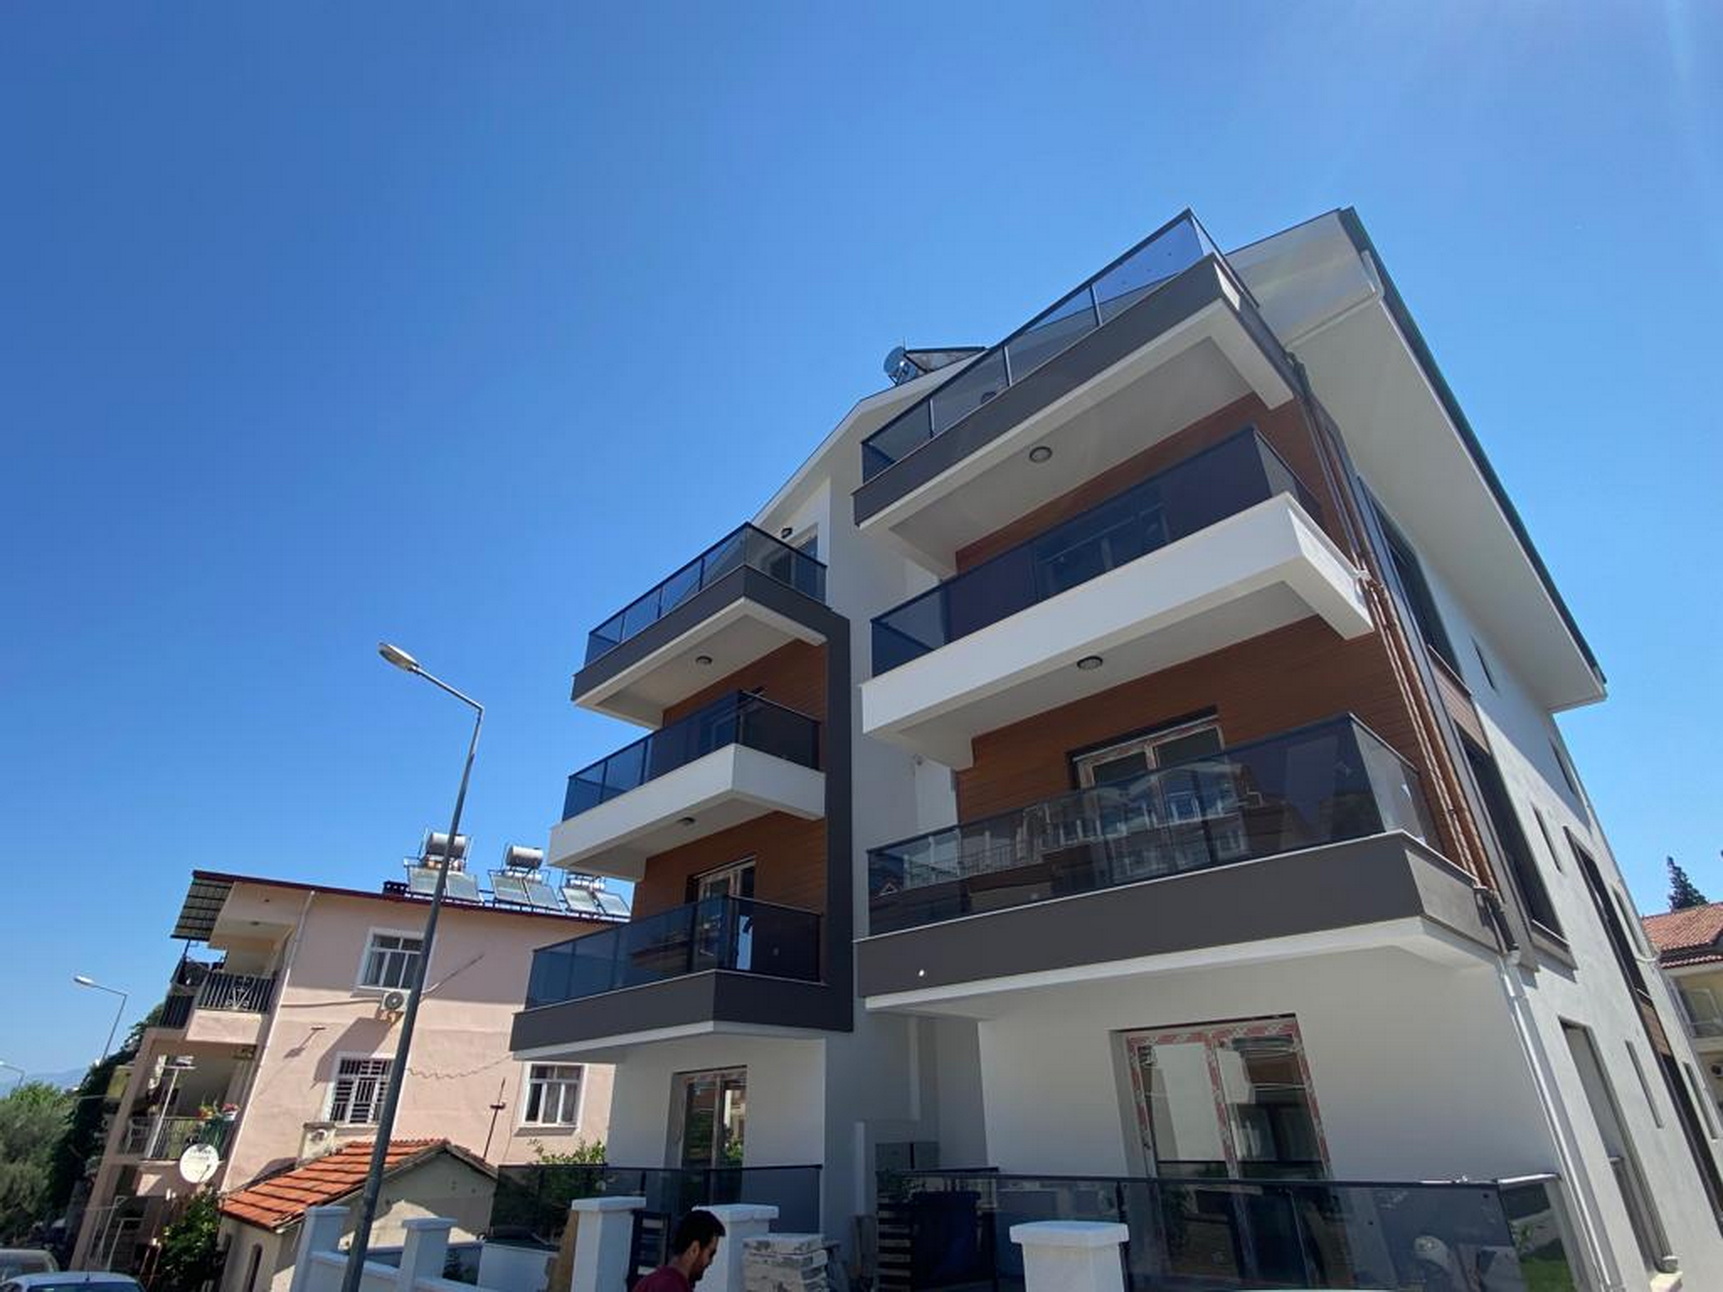 3 & 4 Bedroom Duplex Apartments Close to Fethiye Town Center